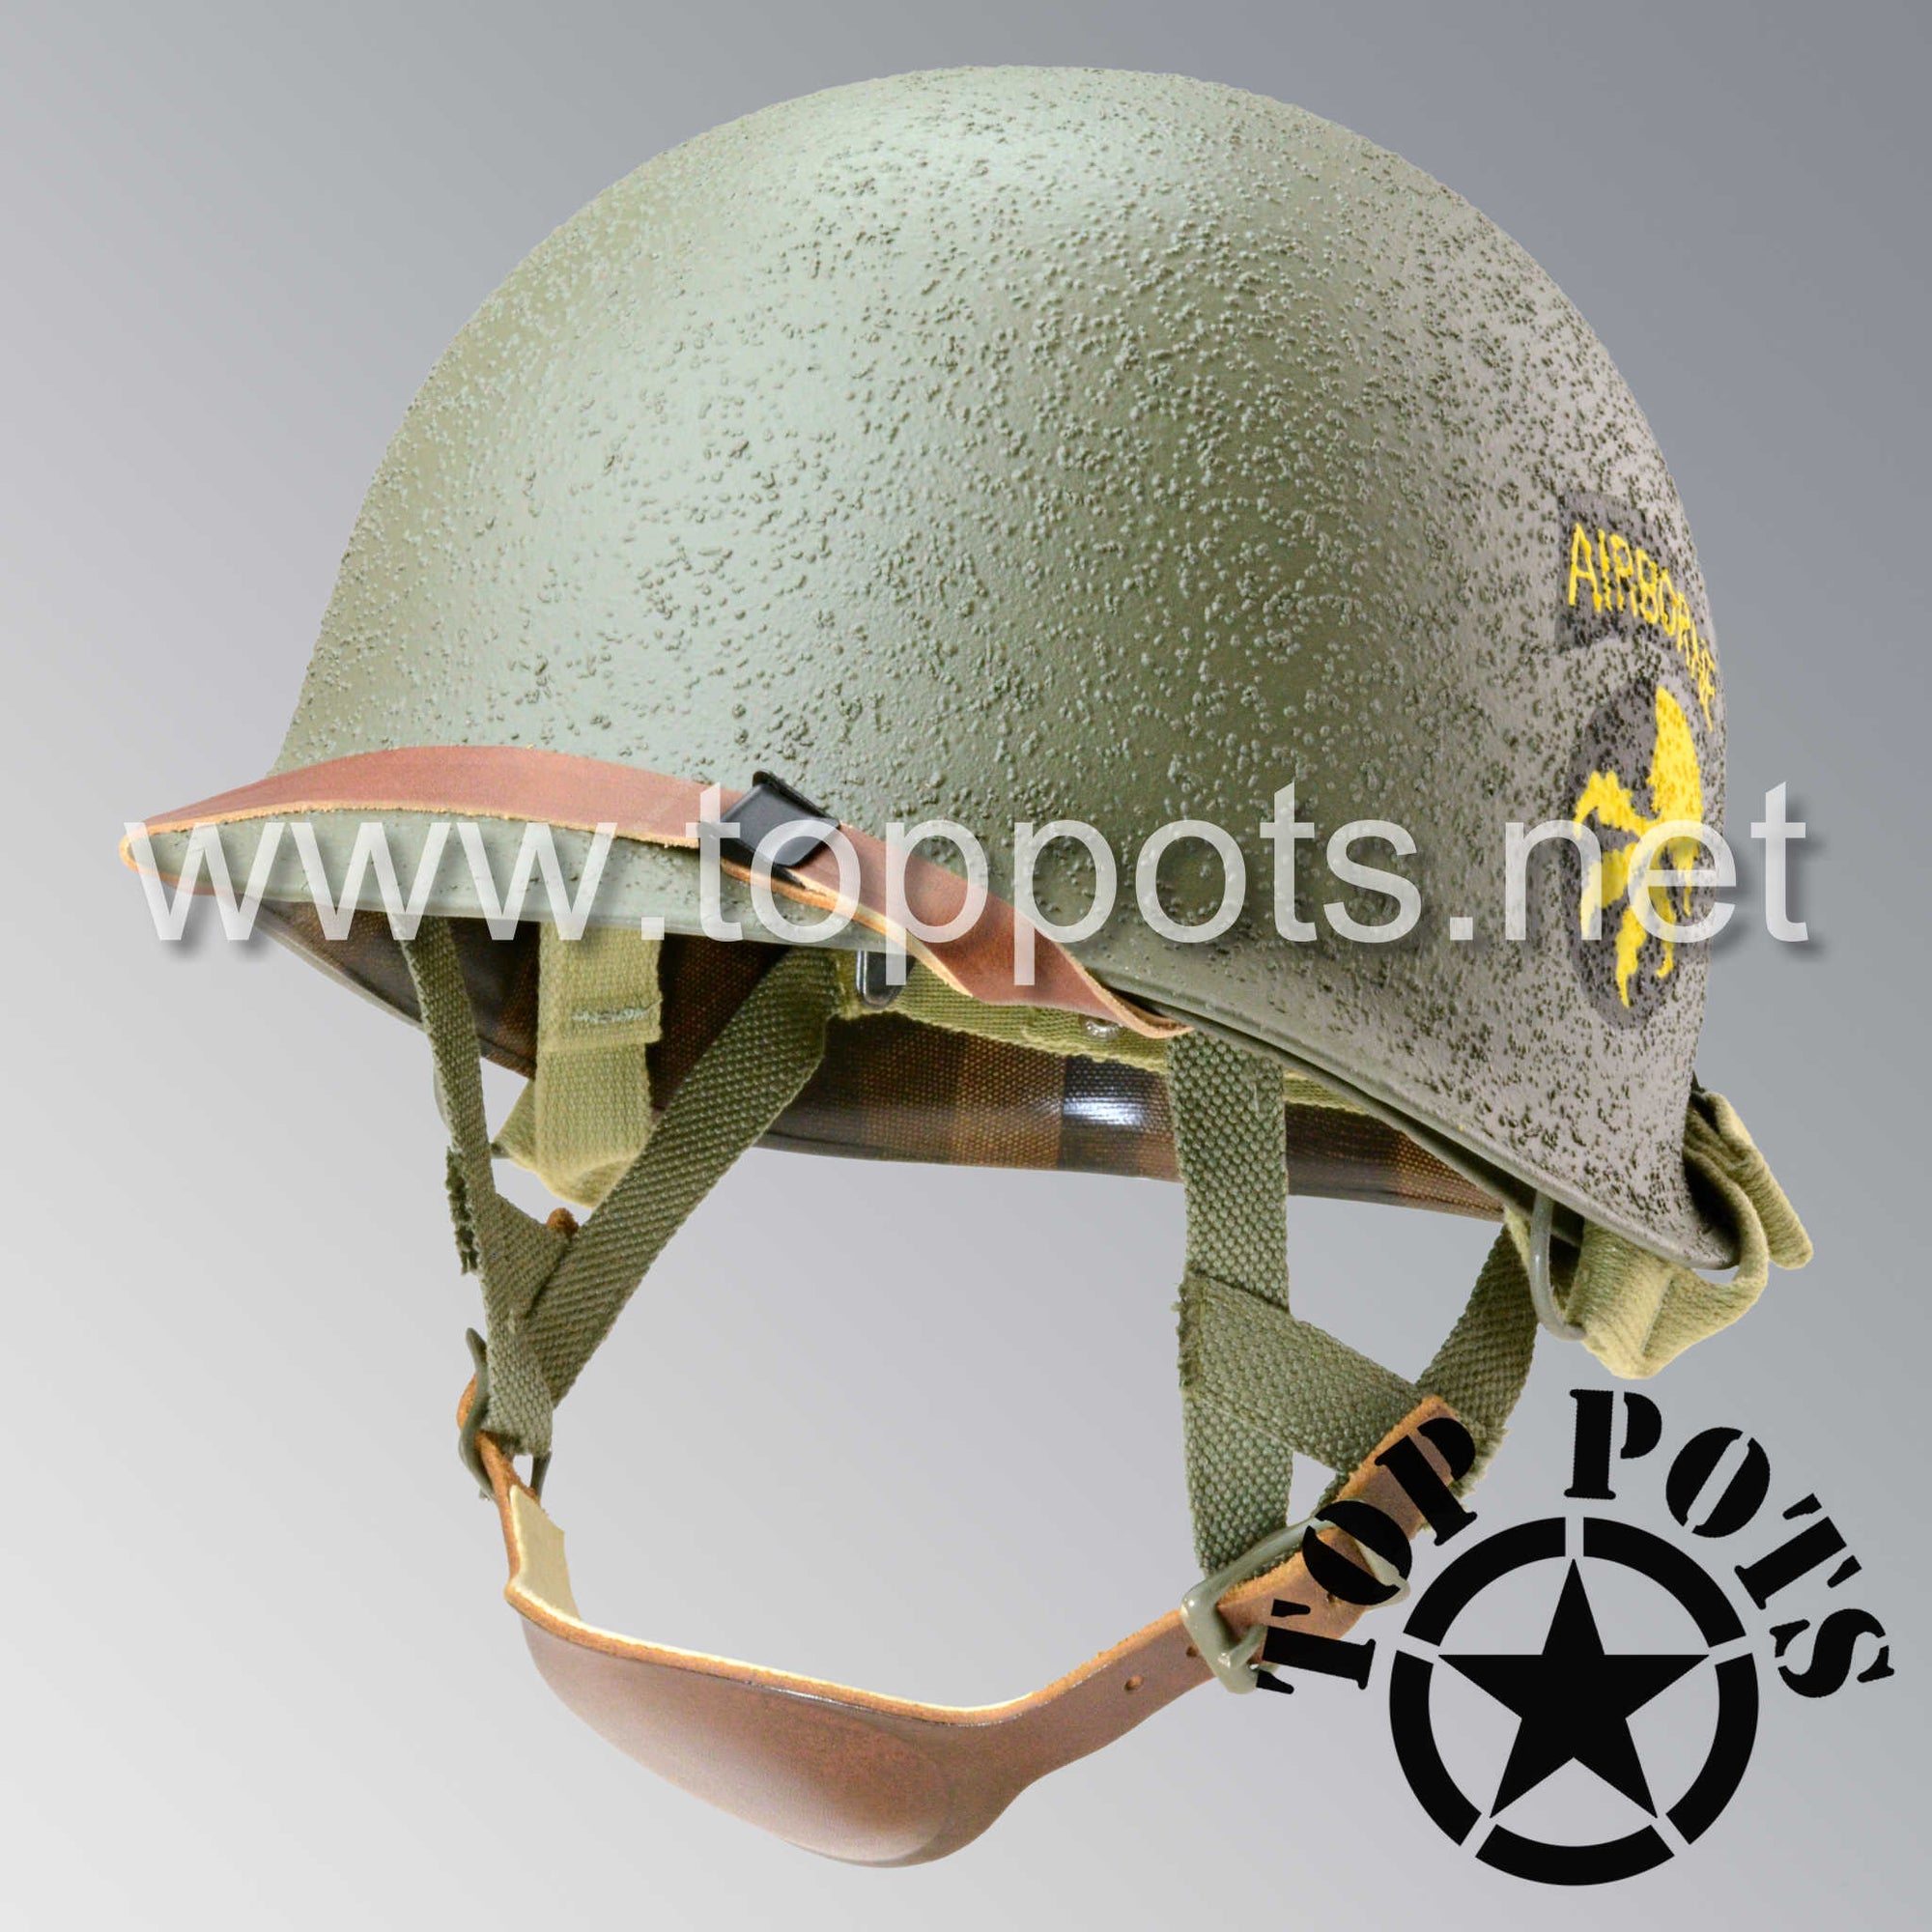 WWII US Army Restored Original M2 Paratrooper Airborne Helmet D Bale Shell and Liner with 17th Airborne Division Emblem